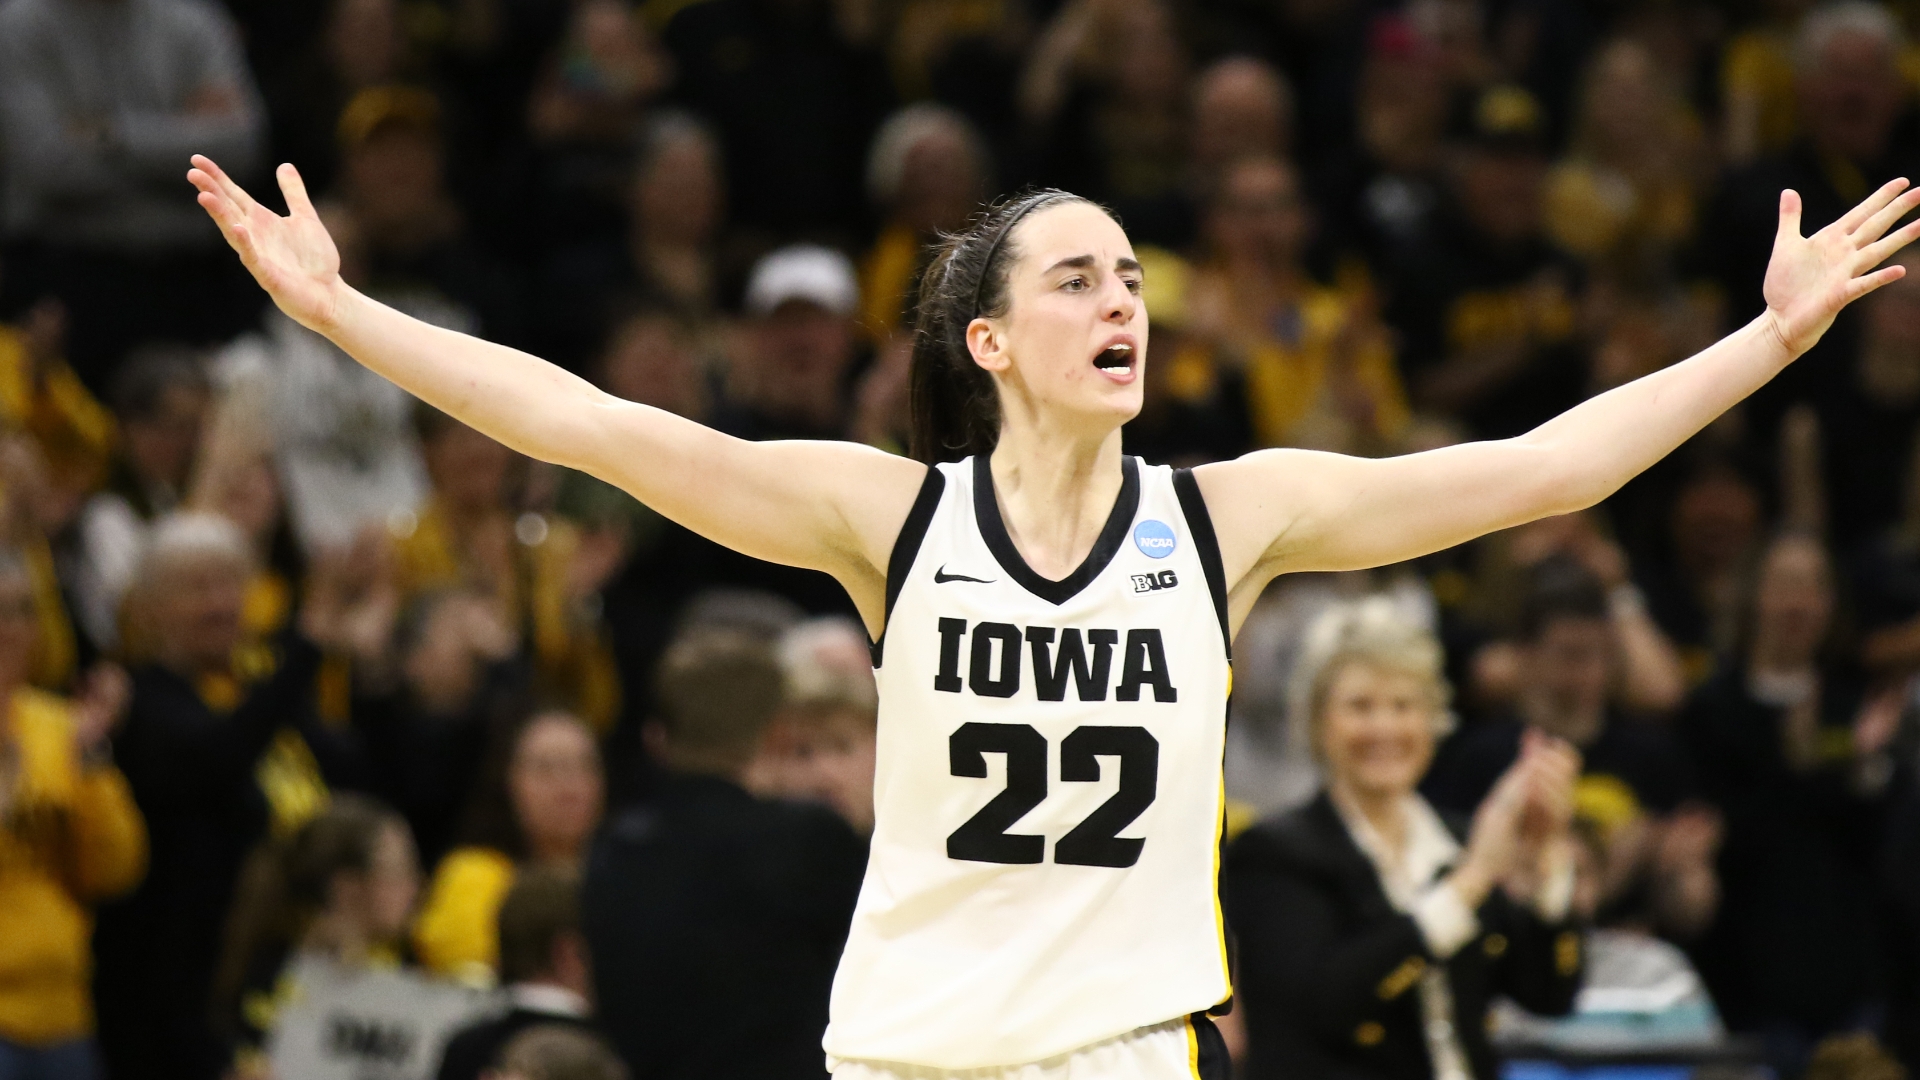 Iowa holds off West Virginia in a nail-biter to reach Sweet 16